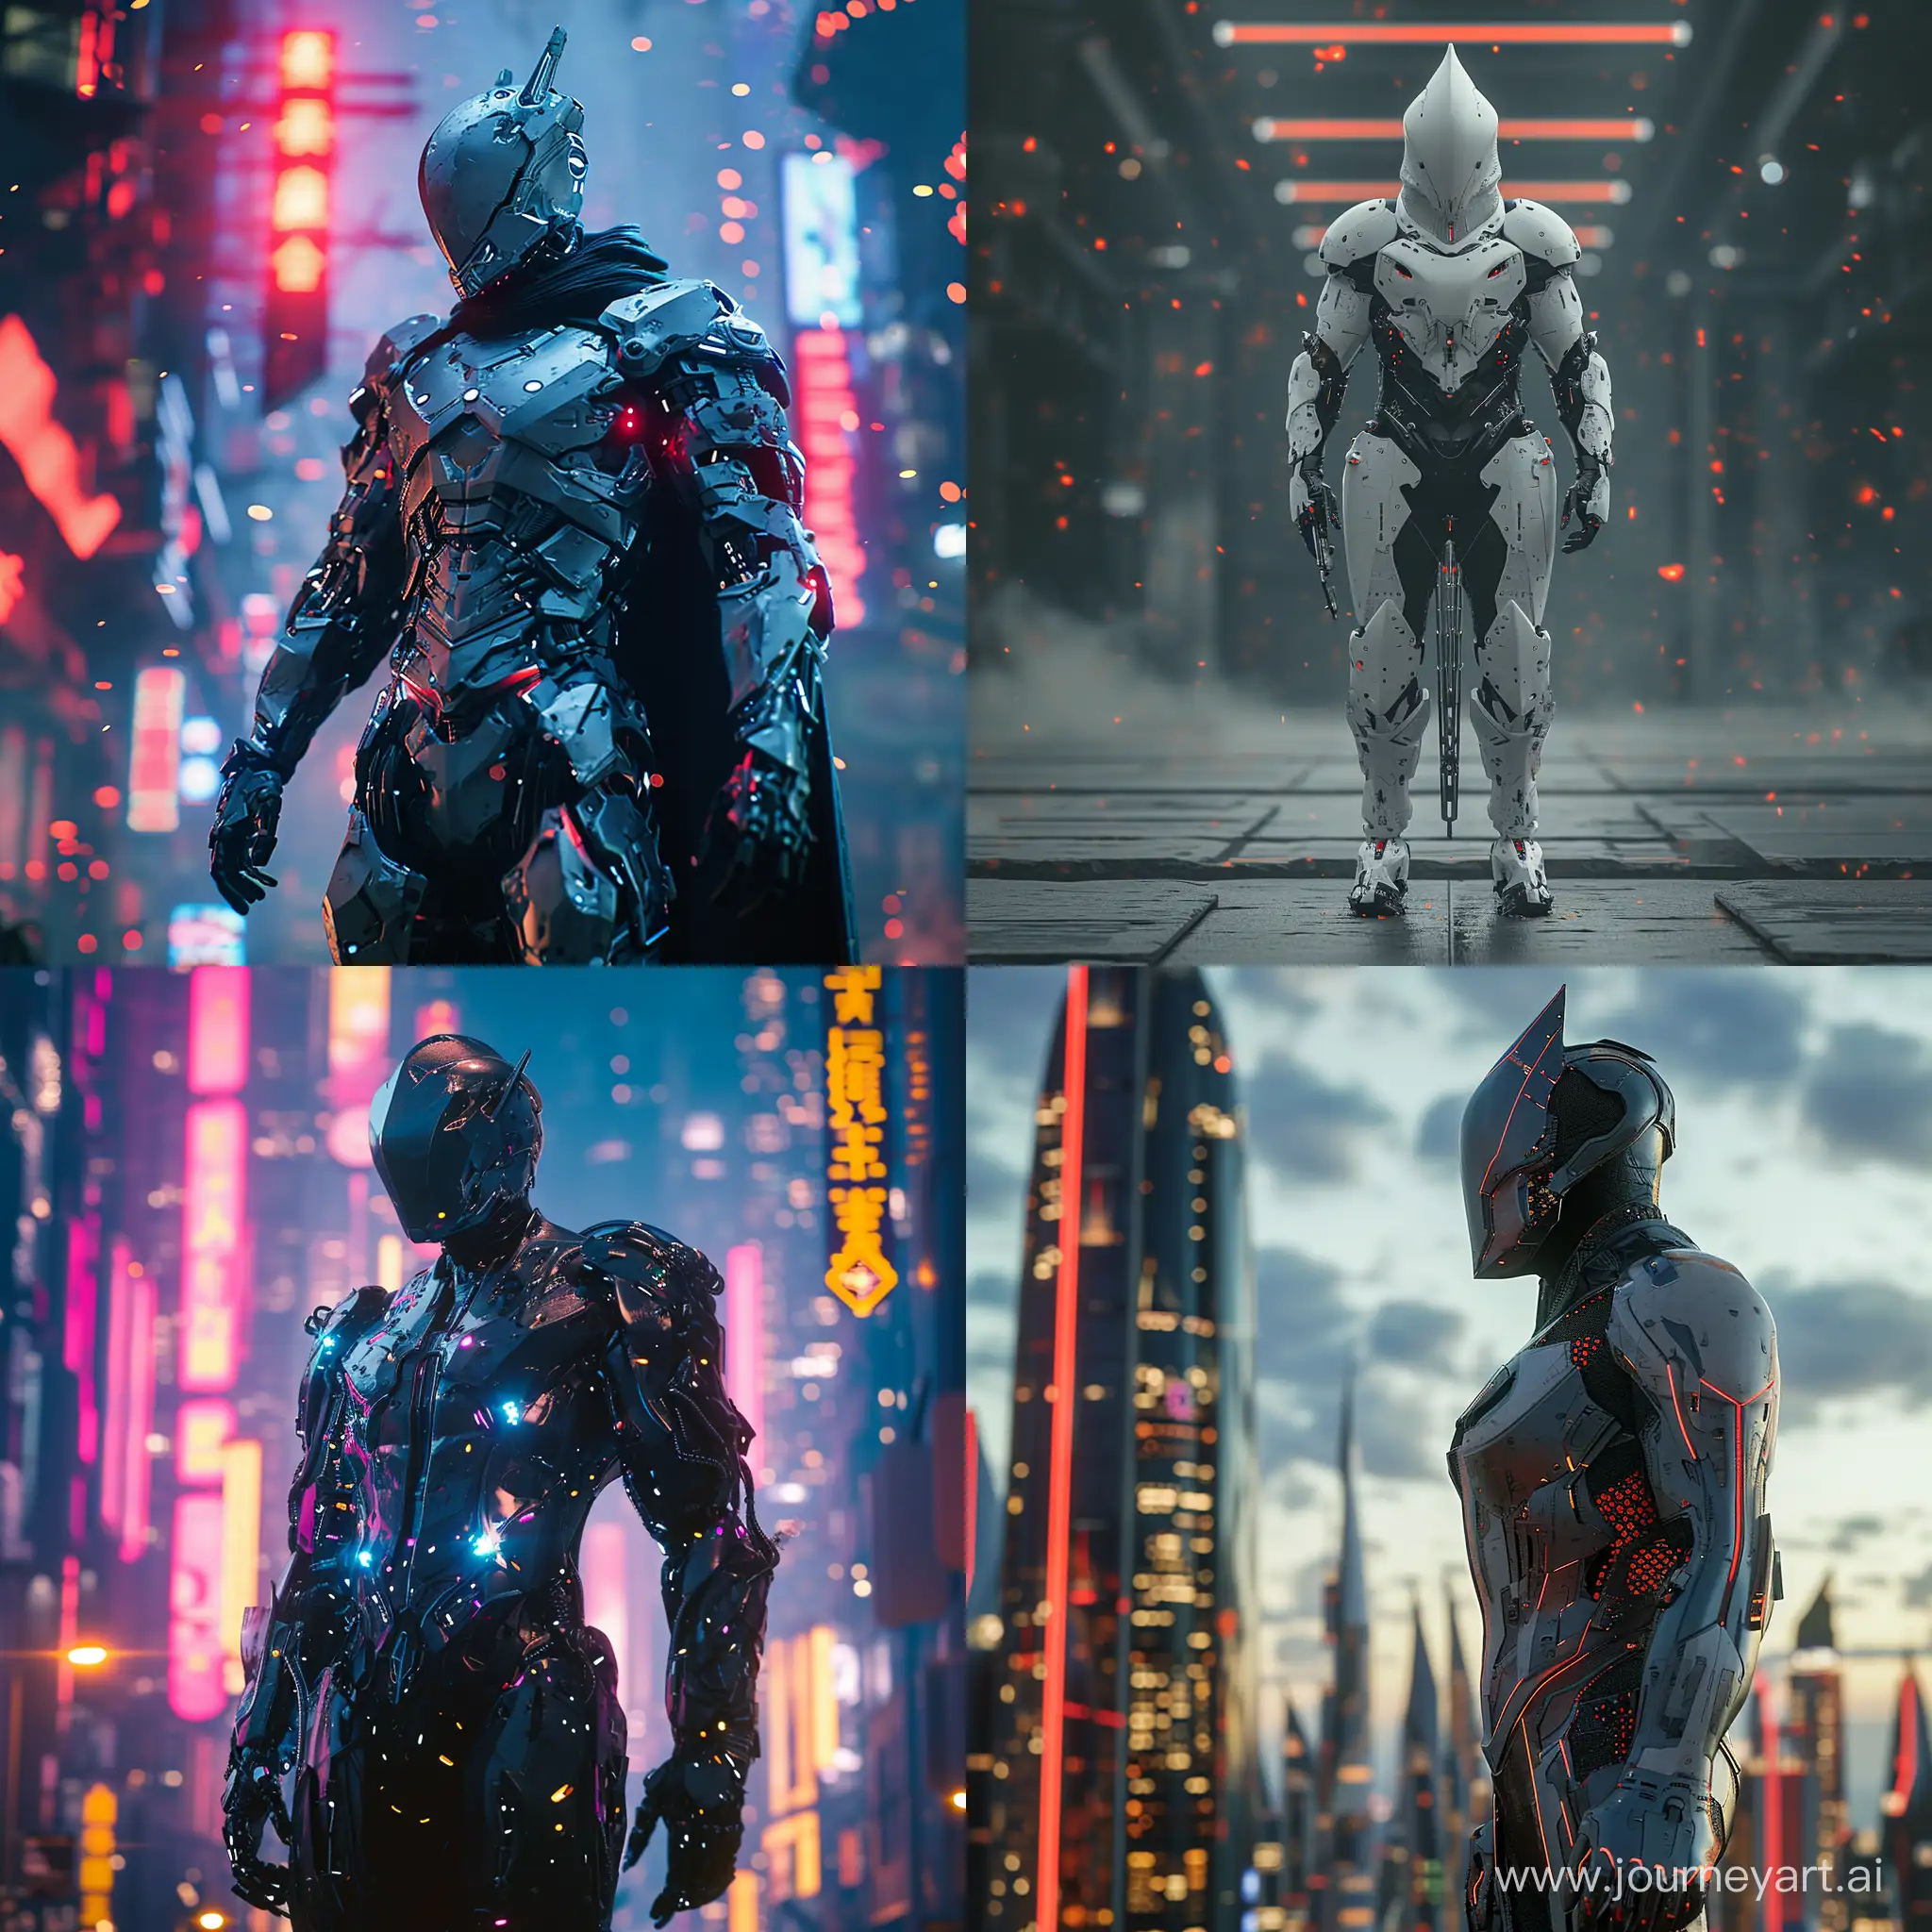 Cybernetic-White-Knight-in-Epic-Cyberpunk-Armor-Amid-Colorful-Explosions